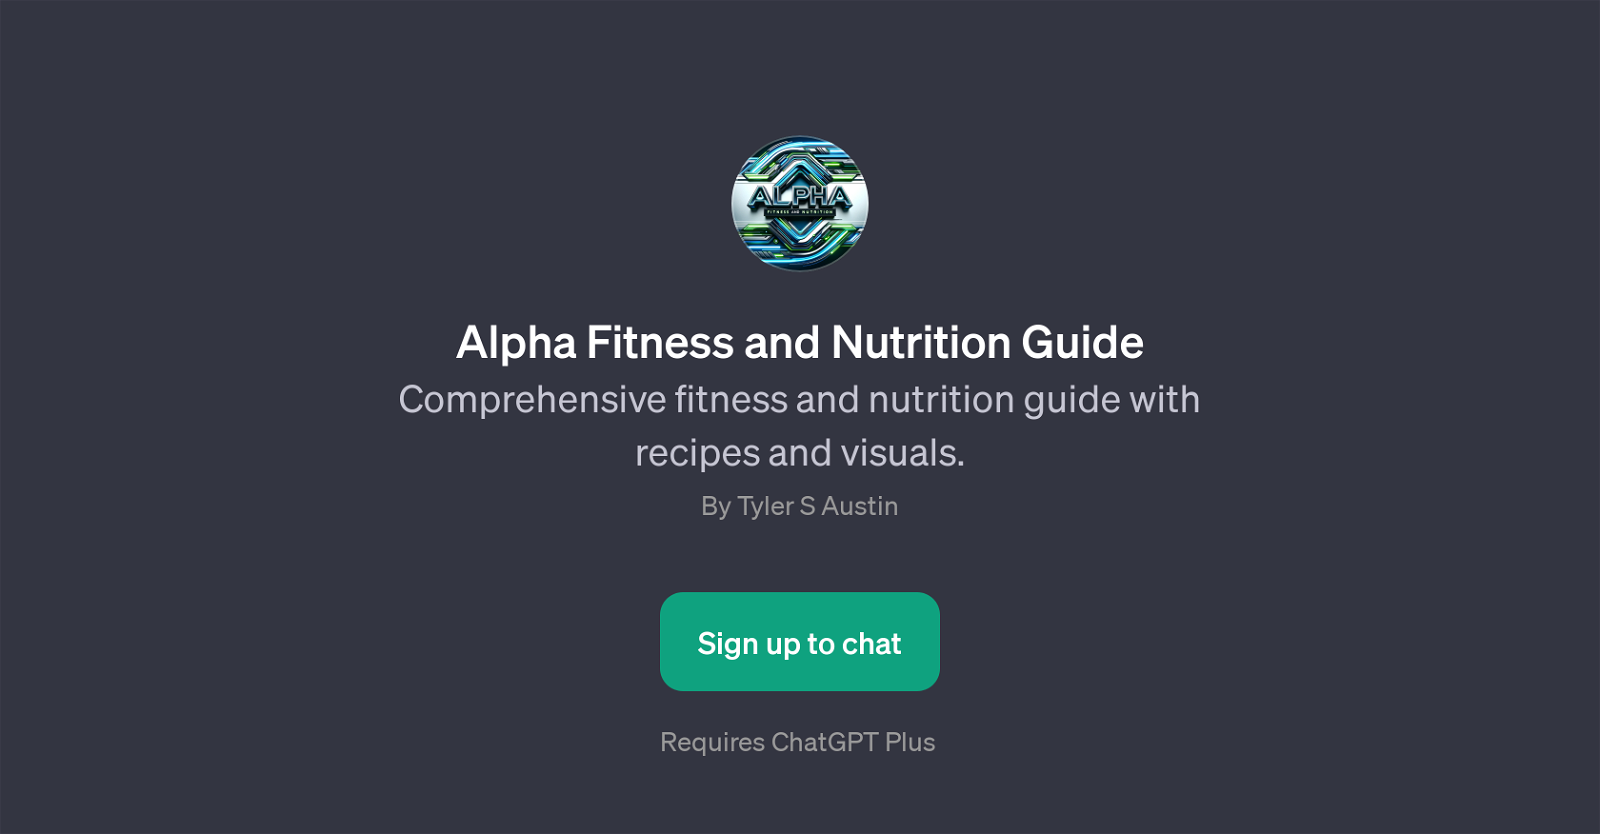 Alpha Fitness and Nutrition Guide website